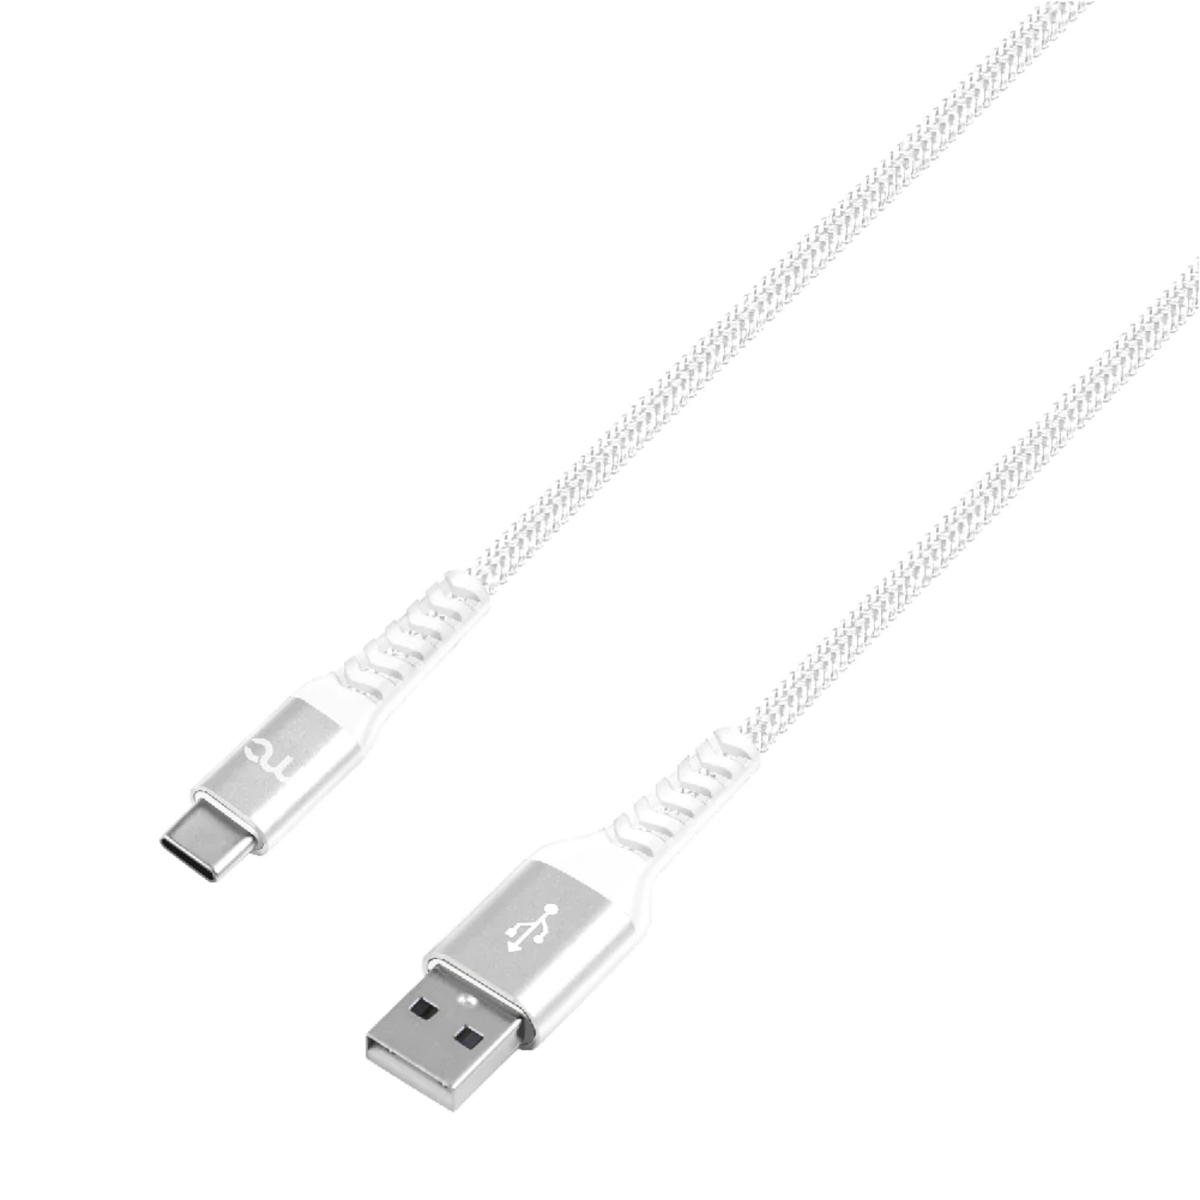 My Candy USB A to Type C Charge and Sync Braided Cable, 1.2 m, White, ACMYCN2019CBL019